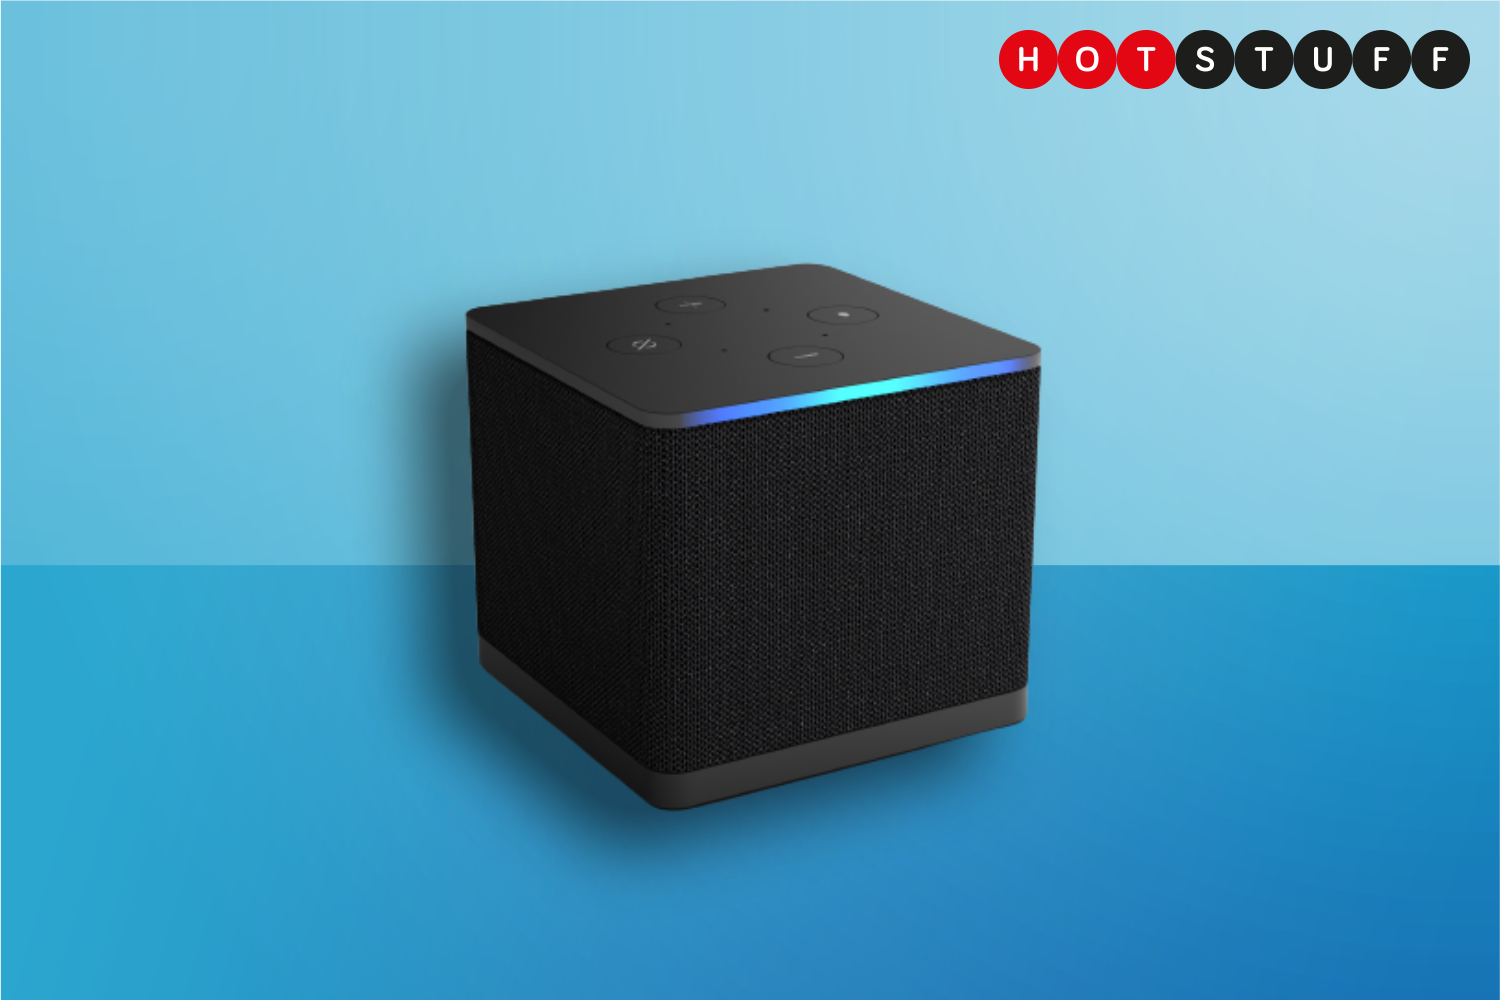 Fire TV Cube, Hands-free streaming device with Alexa